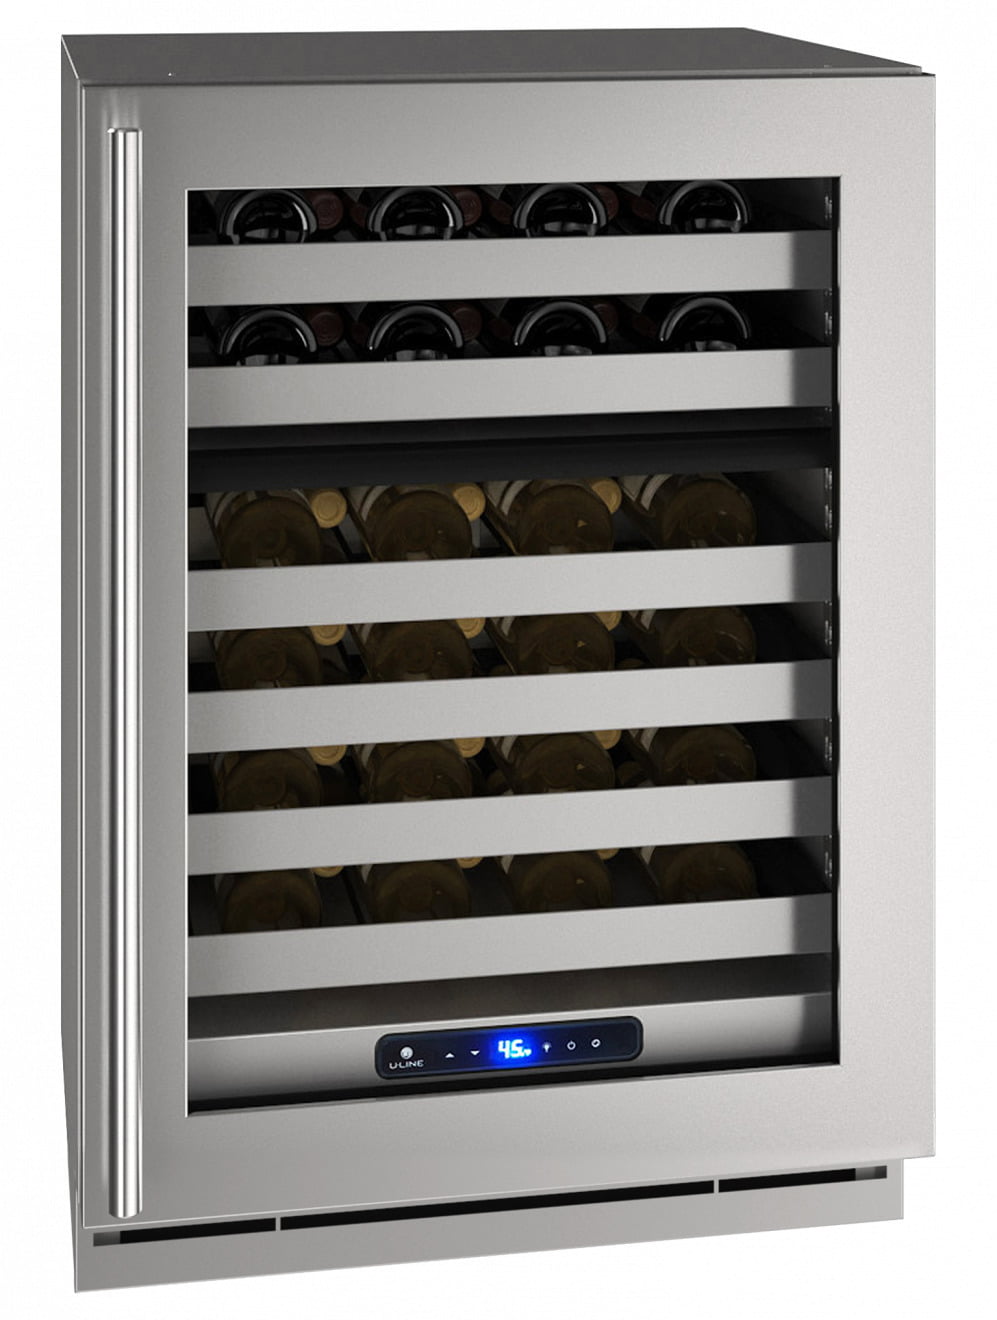 U-Line UHWD524SG51A Hwd524 24" Dual-Zone Wine Refrigerator With Stainless Frame Finish And Left-Hand Hinge Door Swing (115 V/60 Hz Volts /60 Hz Hz)